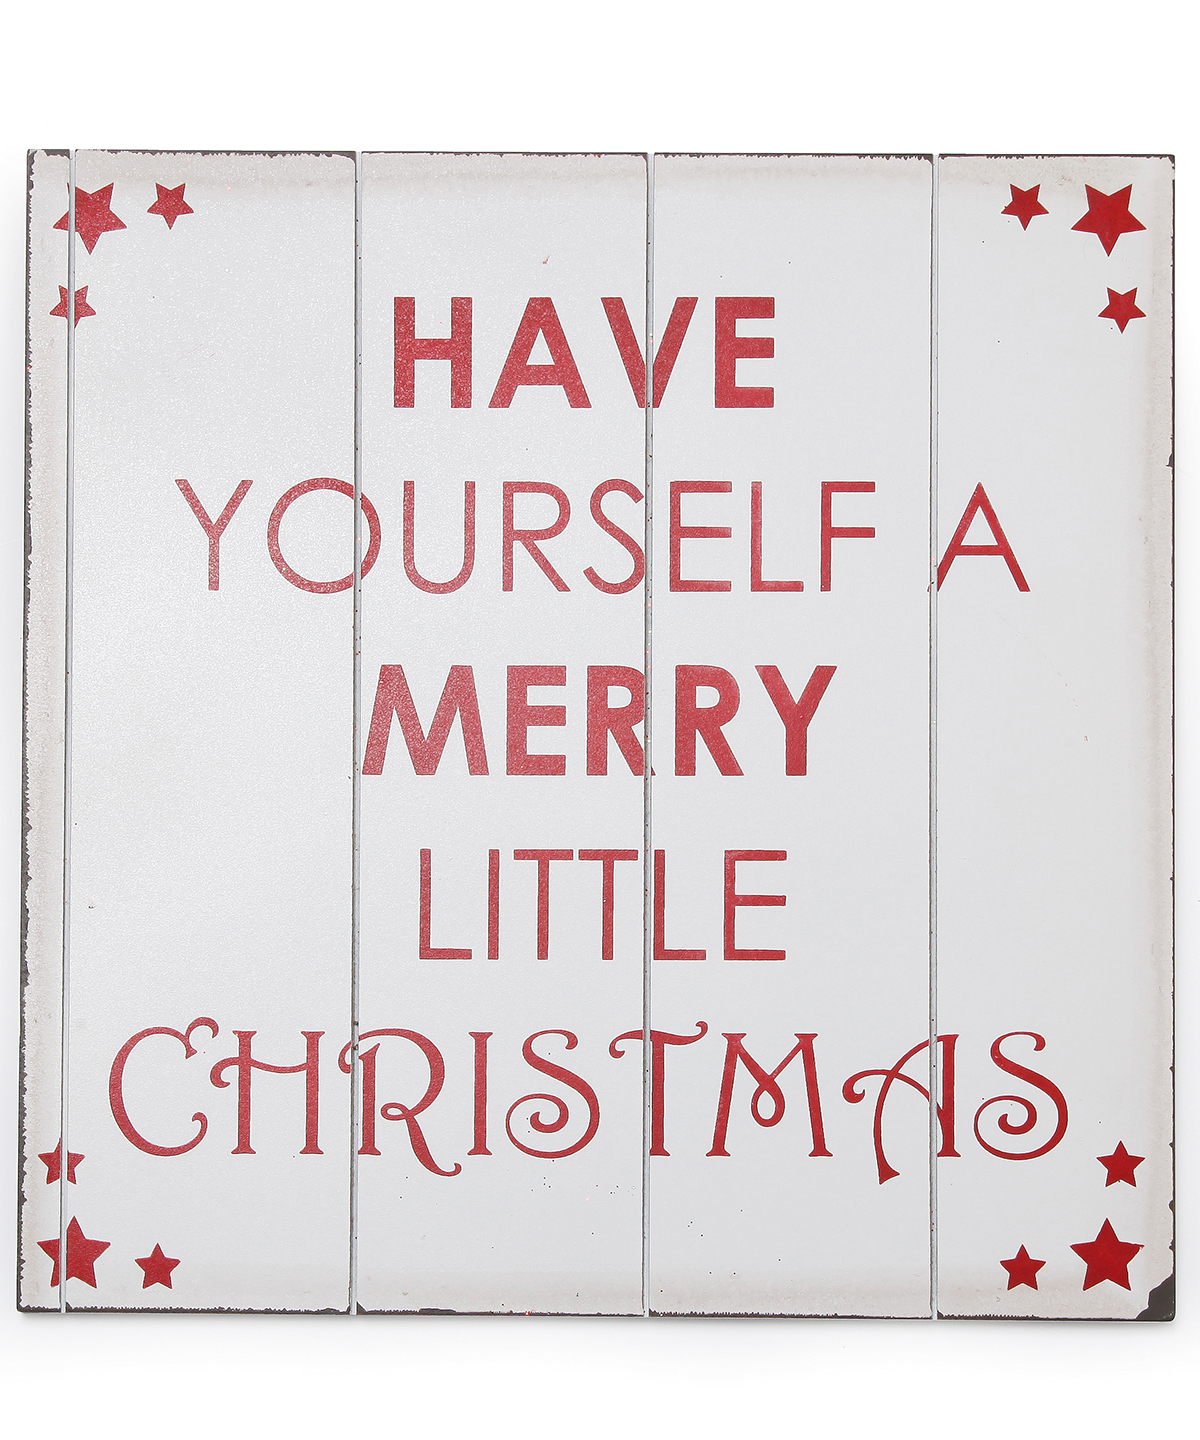 Large "Have yourself a very merry little Christmas" sign